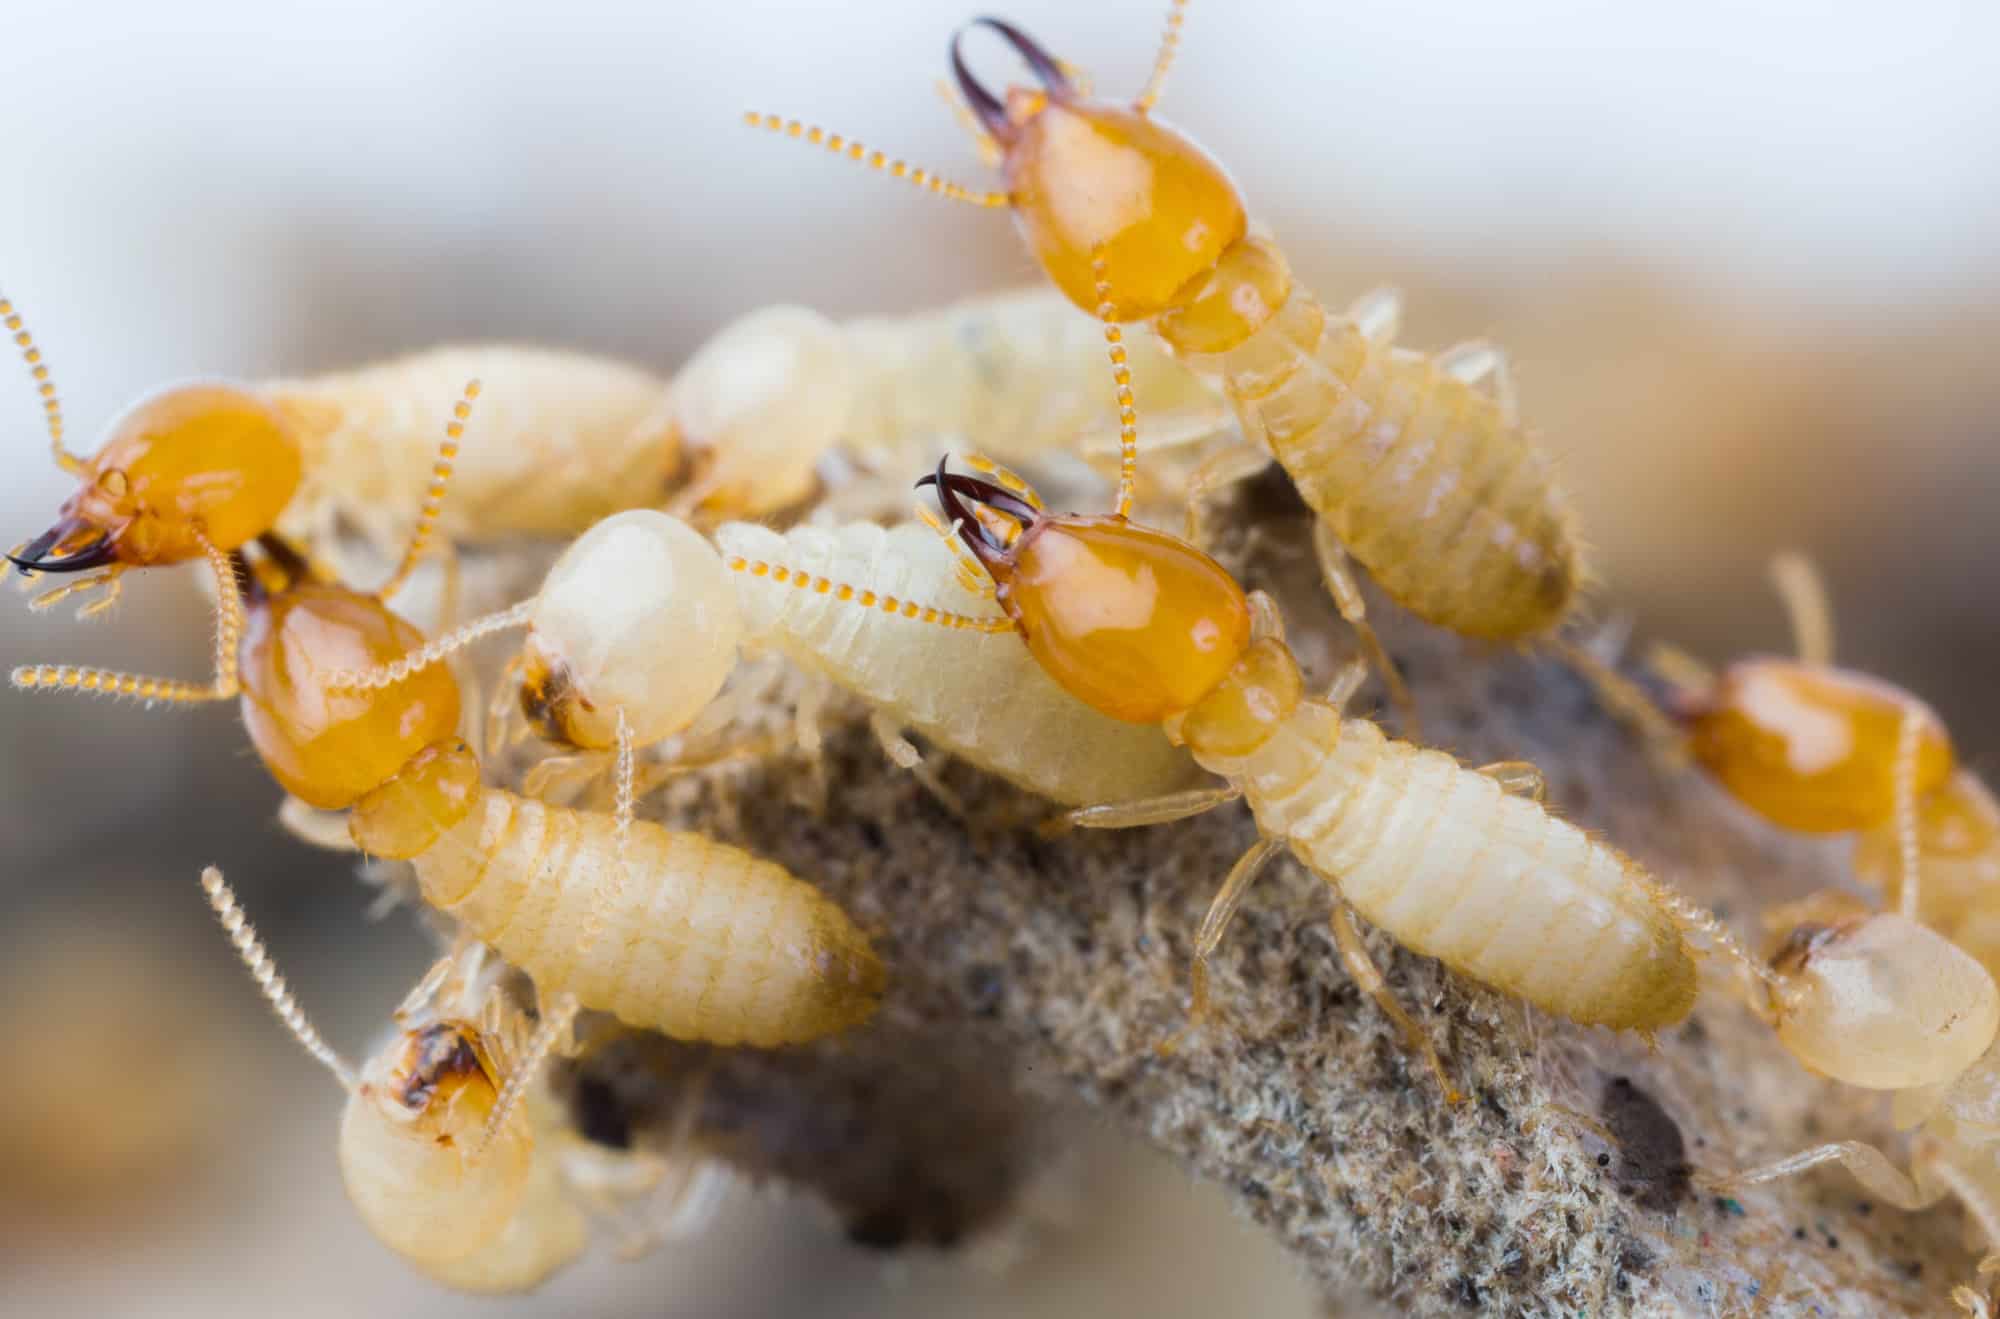 Benefits of a Termite Inspection